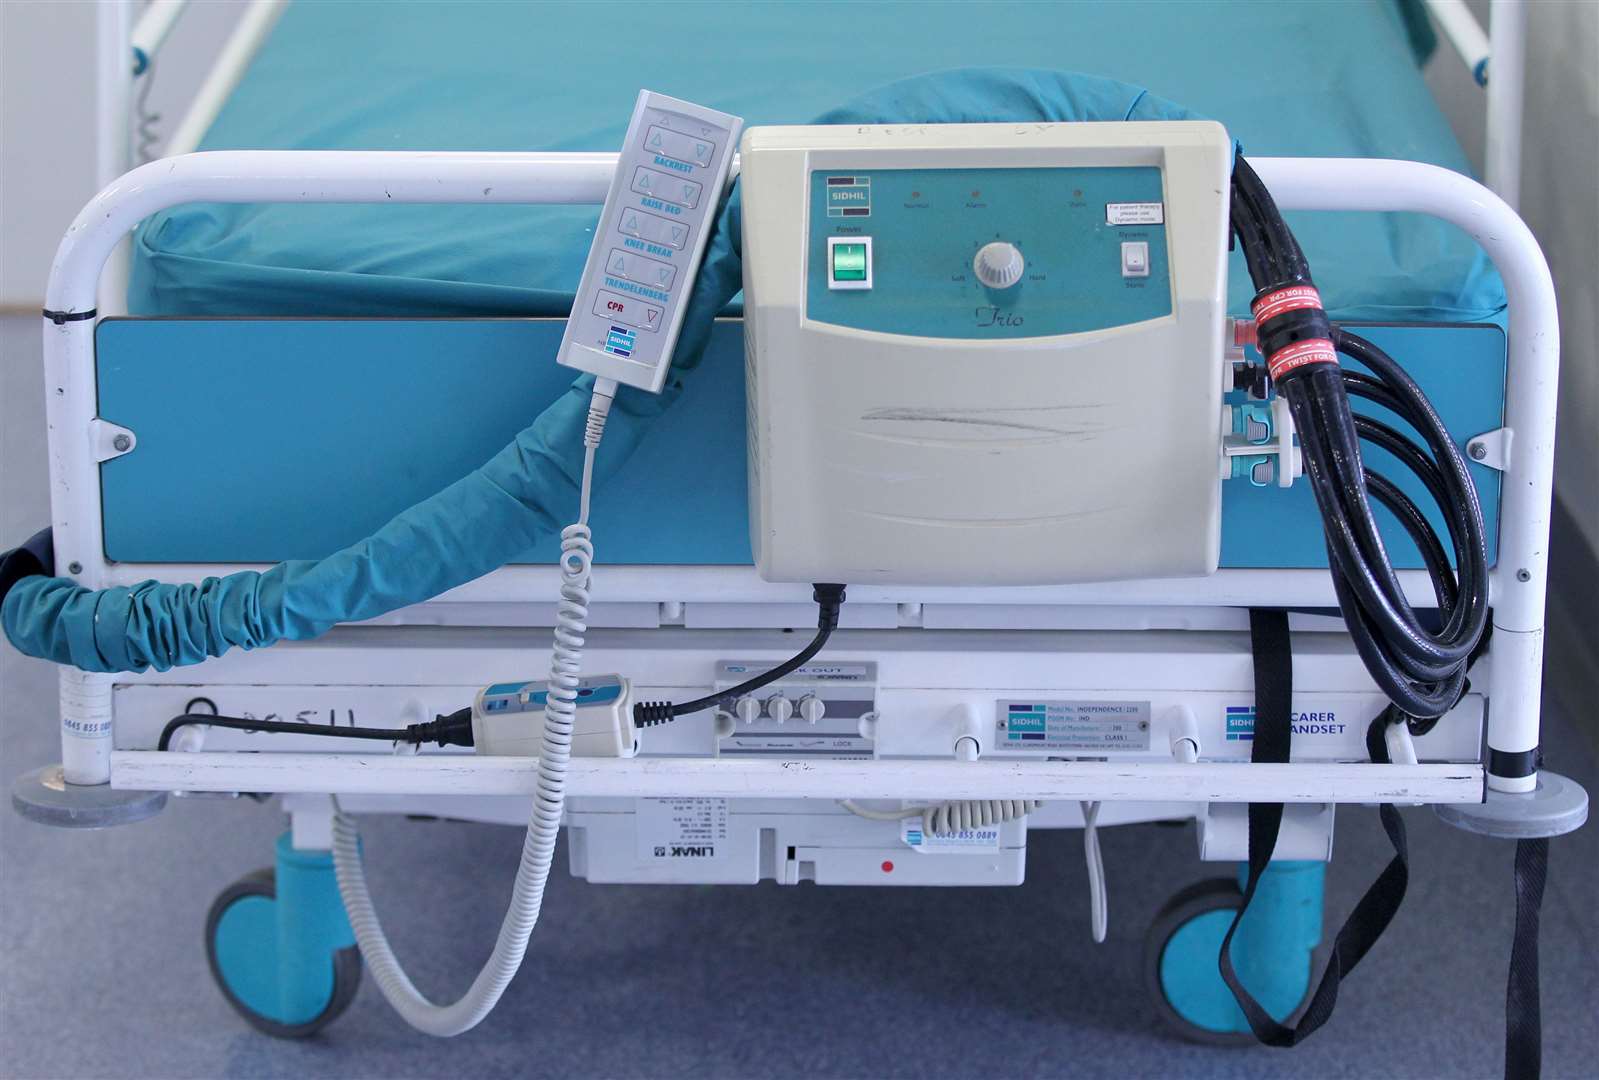 More than 400 additional beds may be needed across the country to support the discharge of patients from local hospitals, modelling found